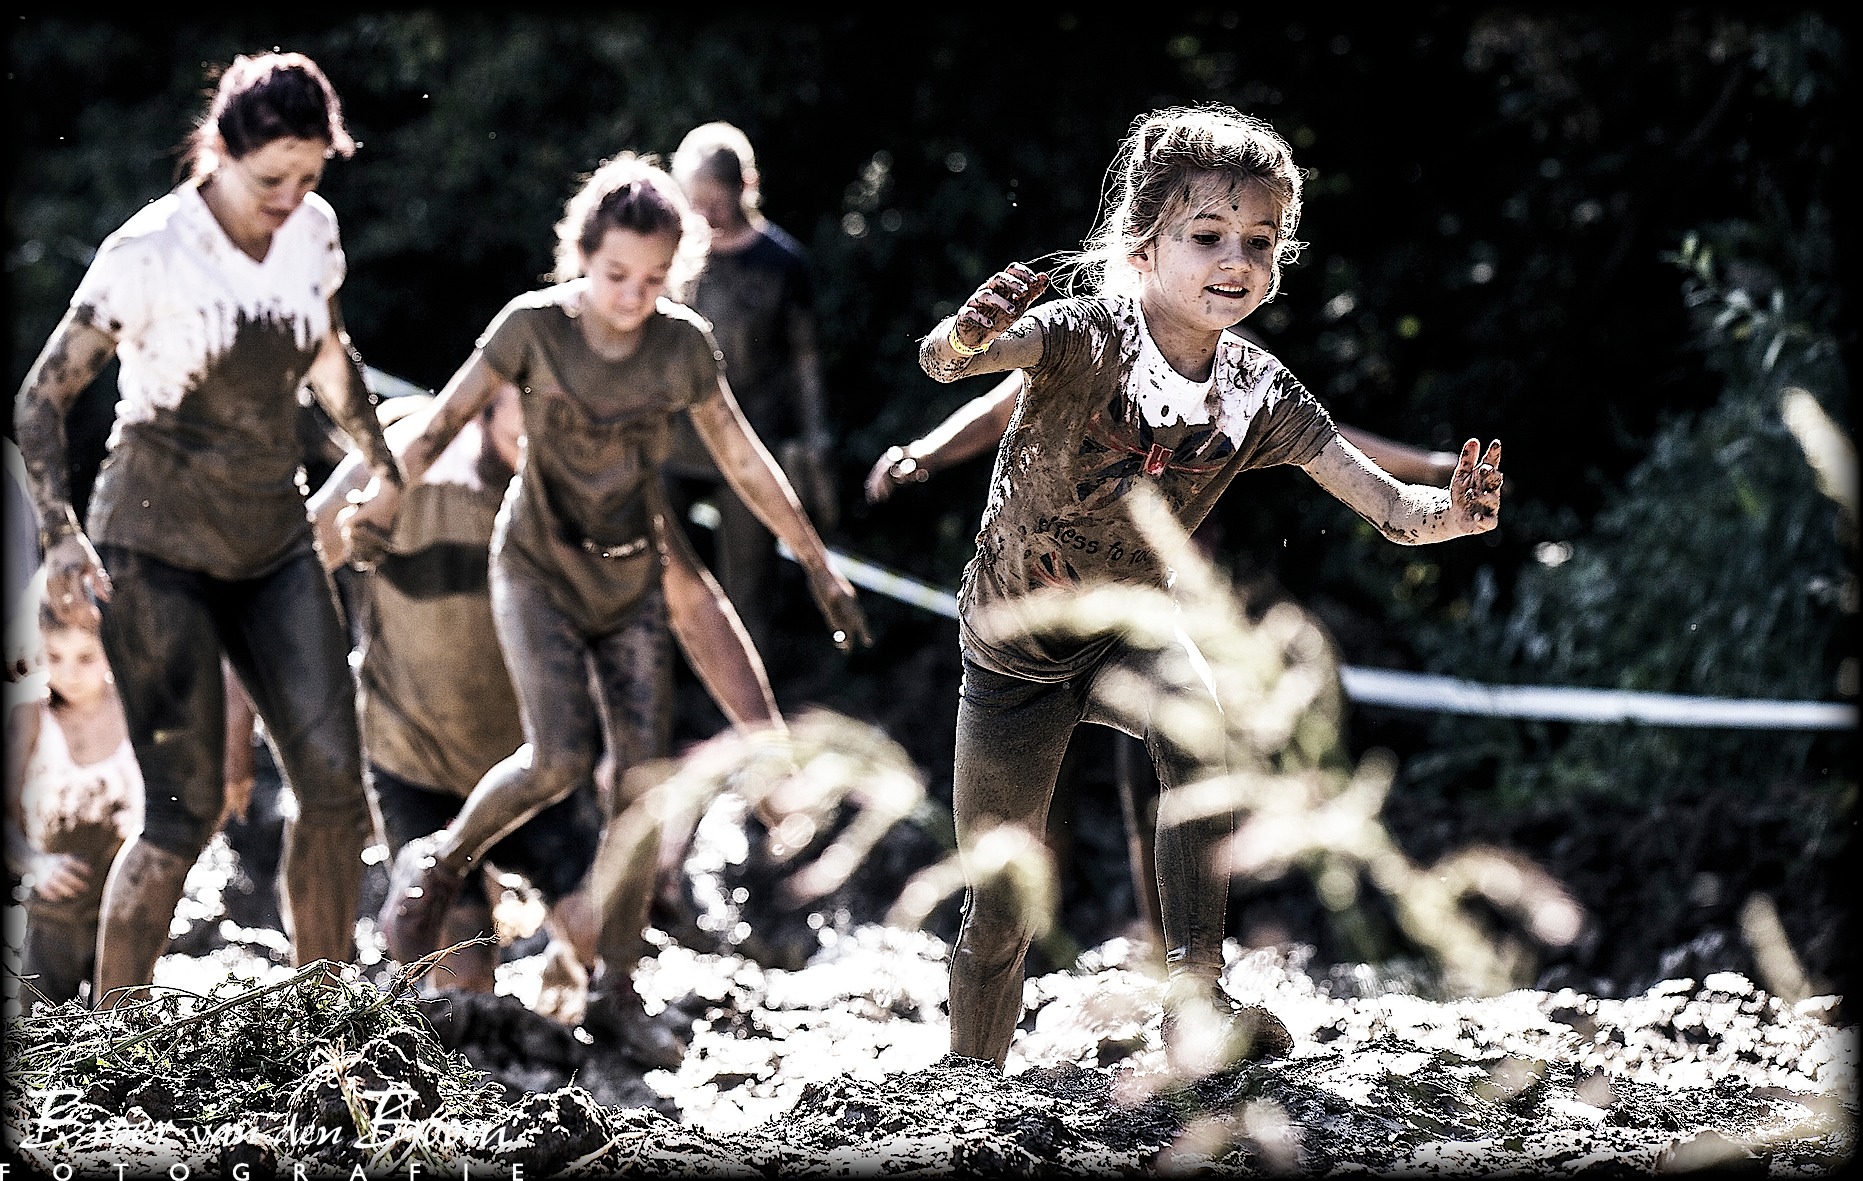 Afbeeldingsresultaat voor Strong Viking Obstacle Run - Family edition